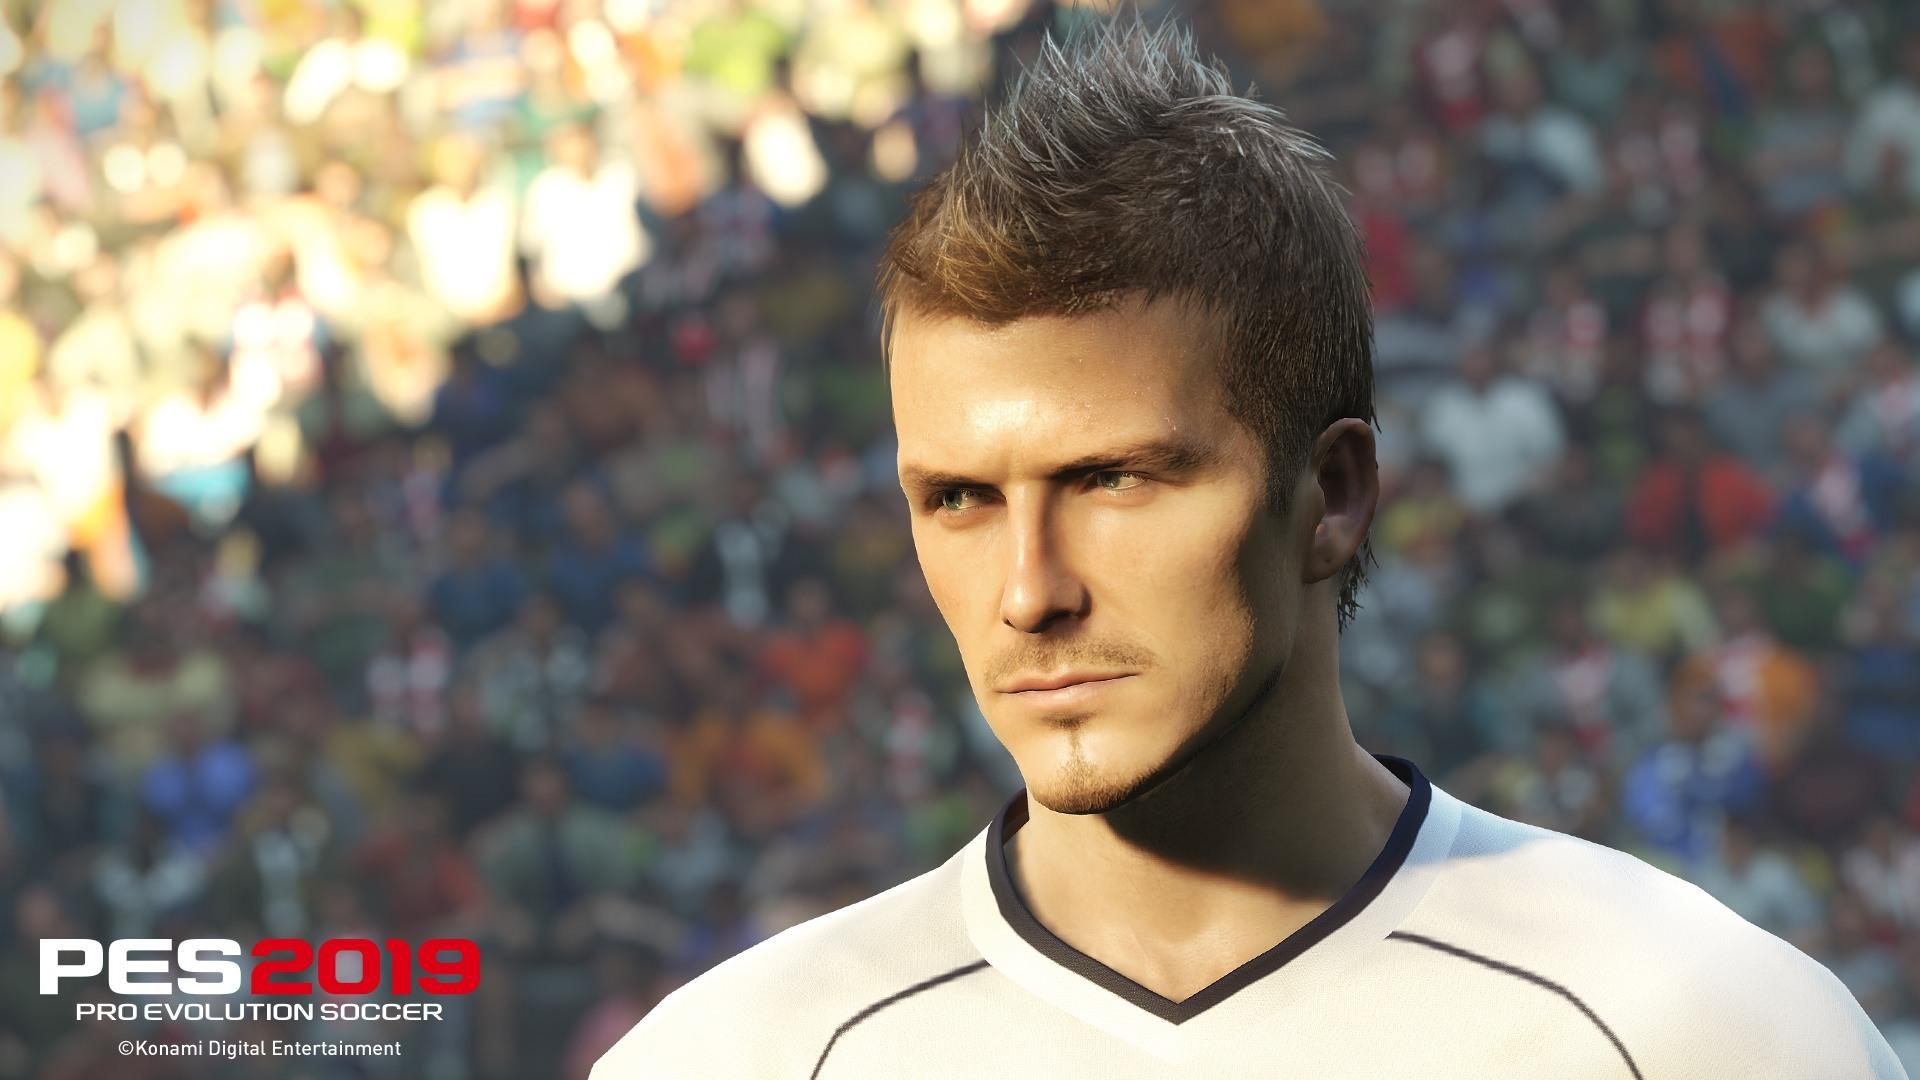 Pro Evolution Soccer 2019 Game Play Demo Launched. Go Factz